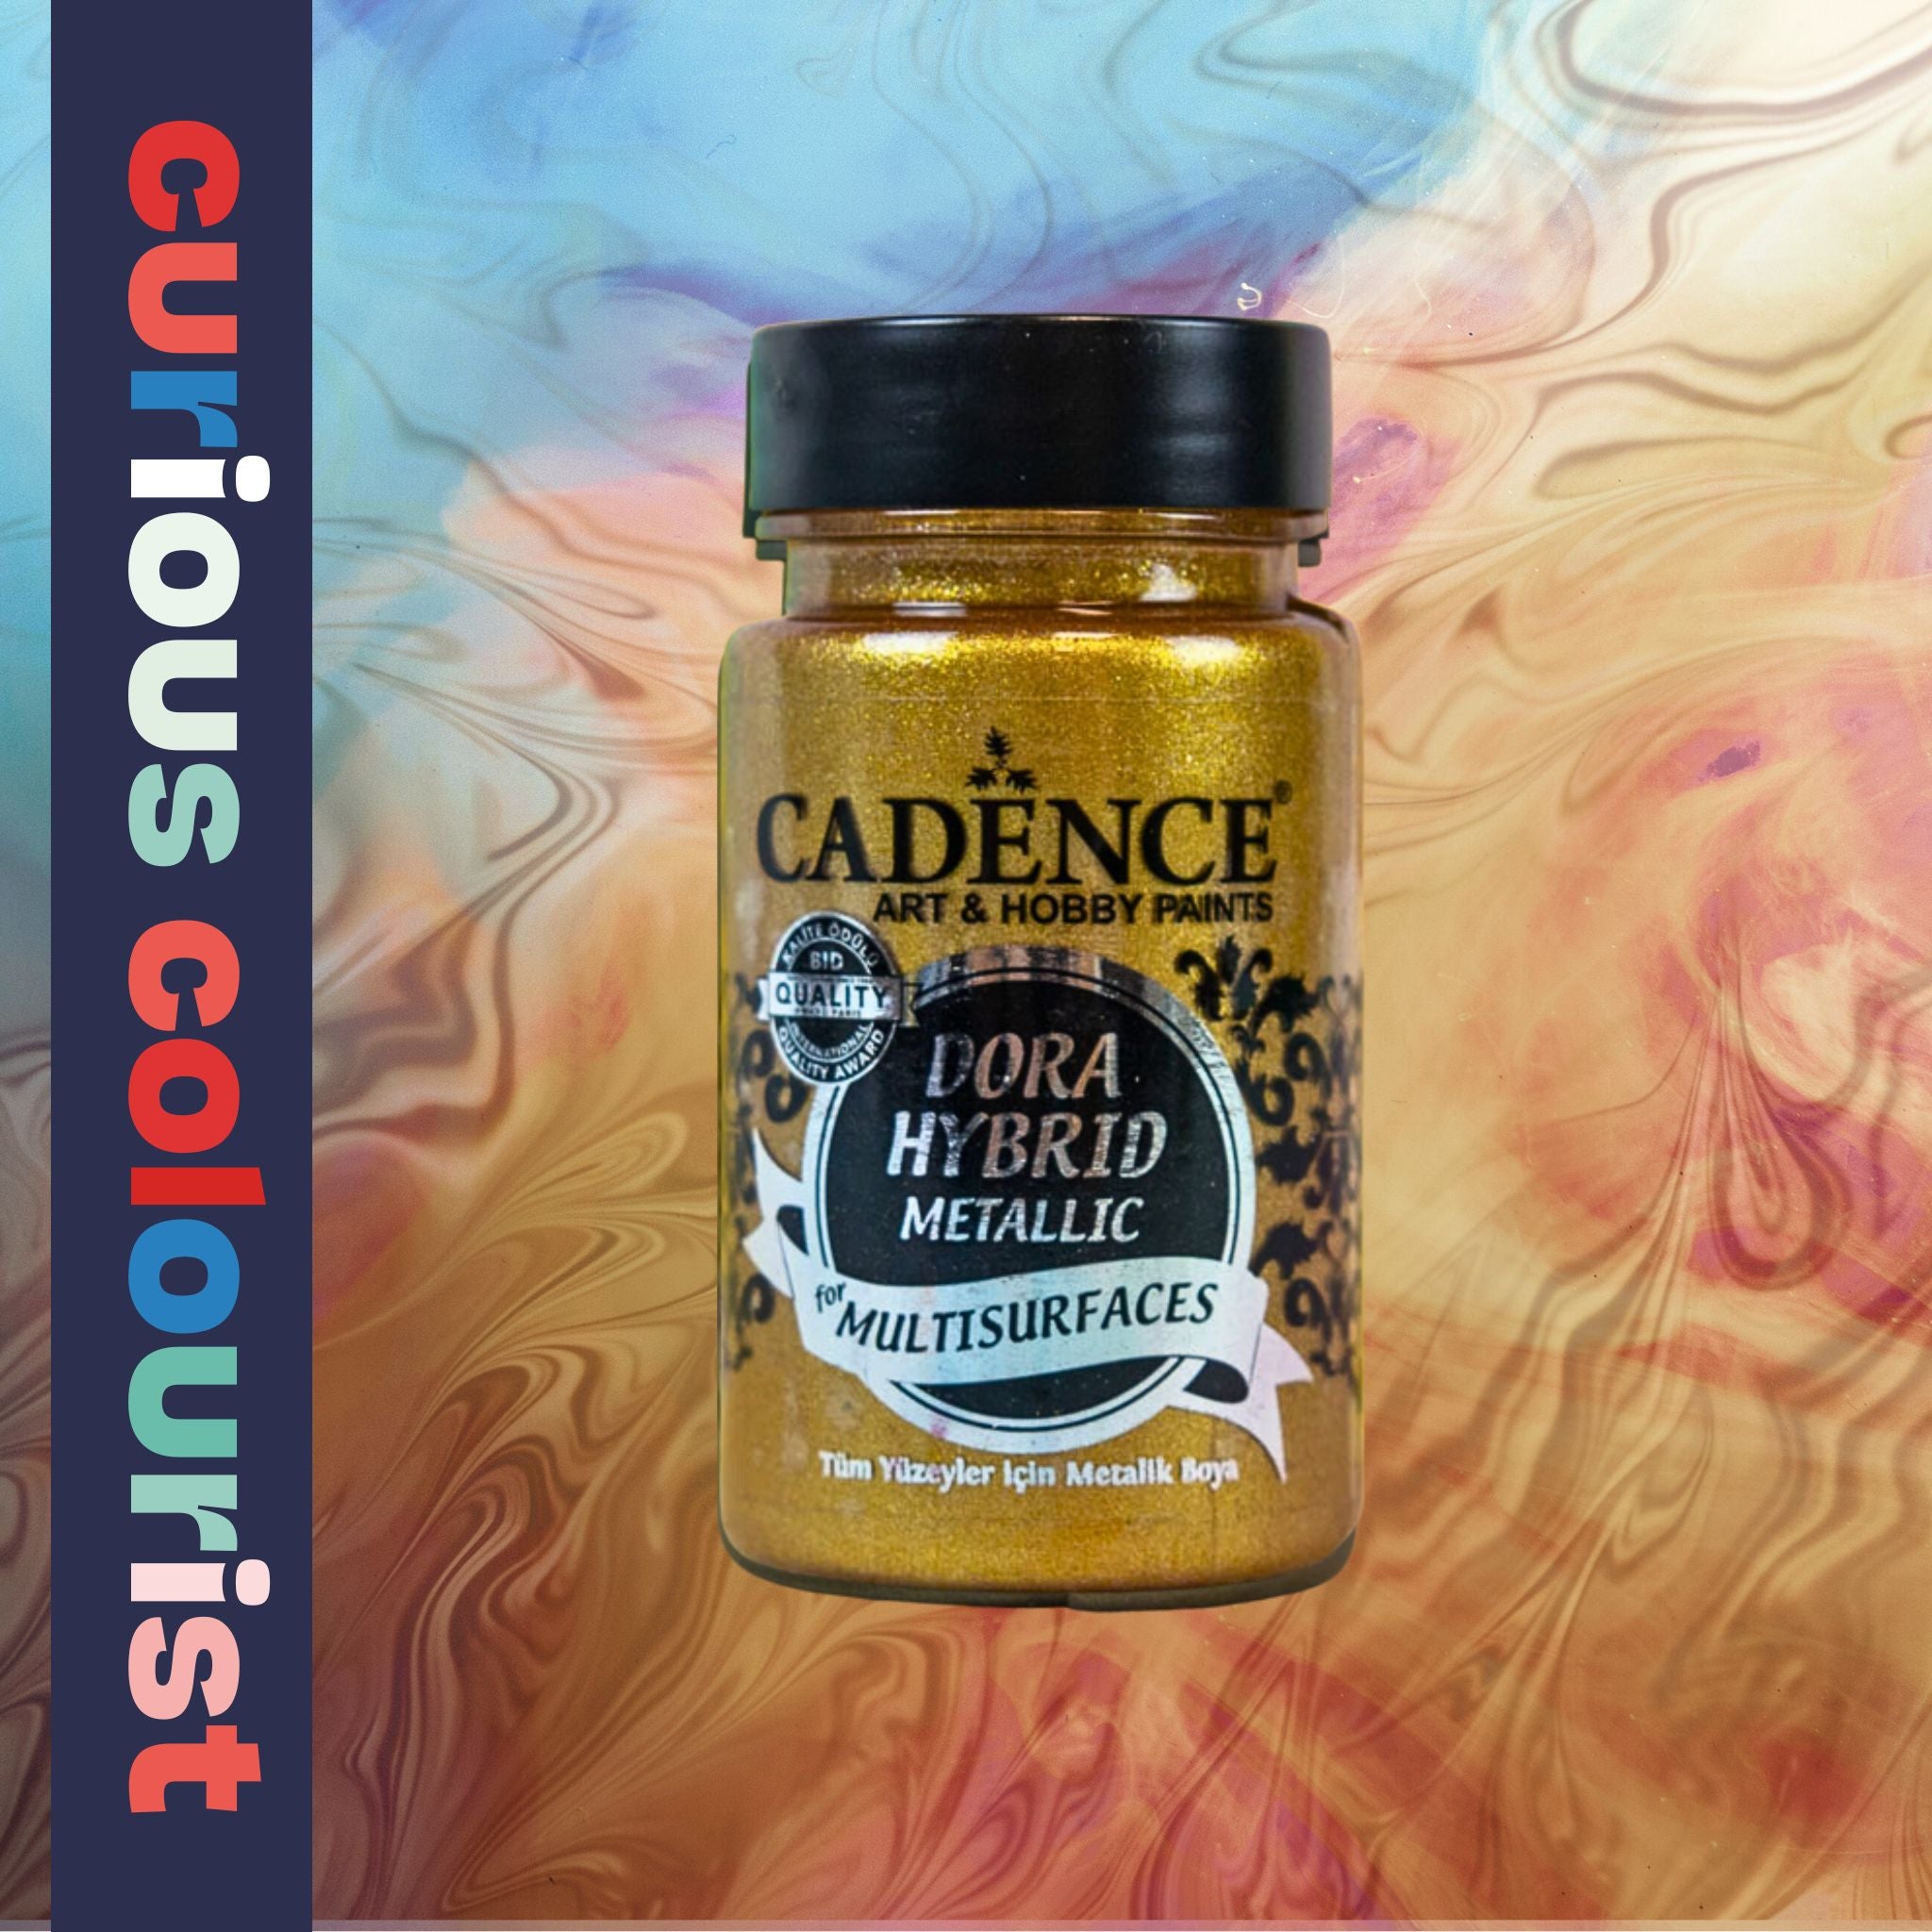 Leathercraft paint Antique Gold - Add a true gilt metallic look to your leathercraft project, sneaker paint